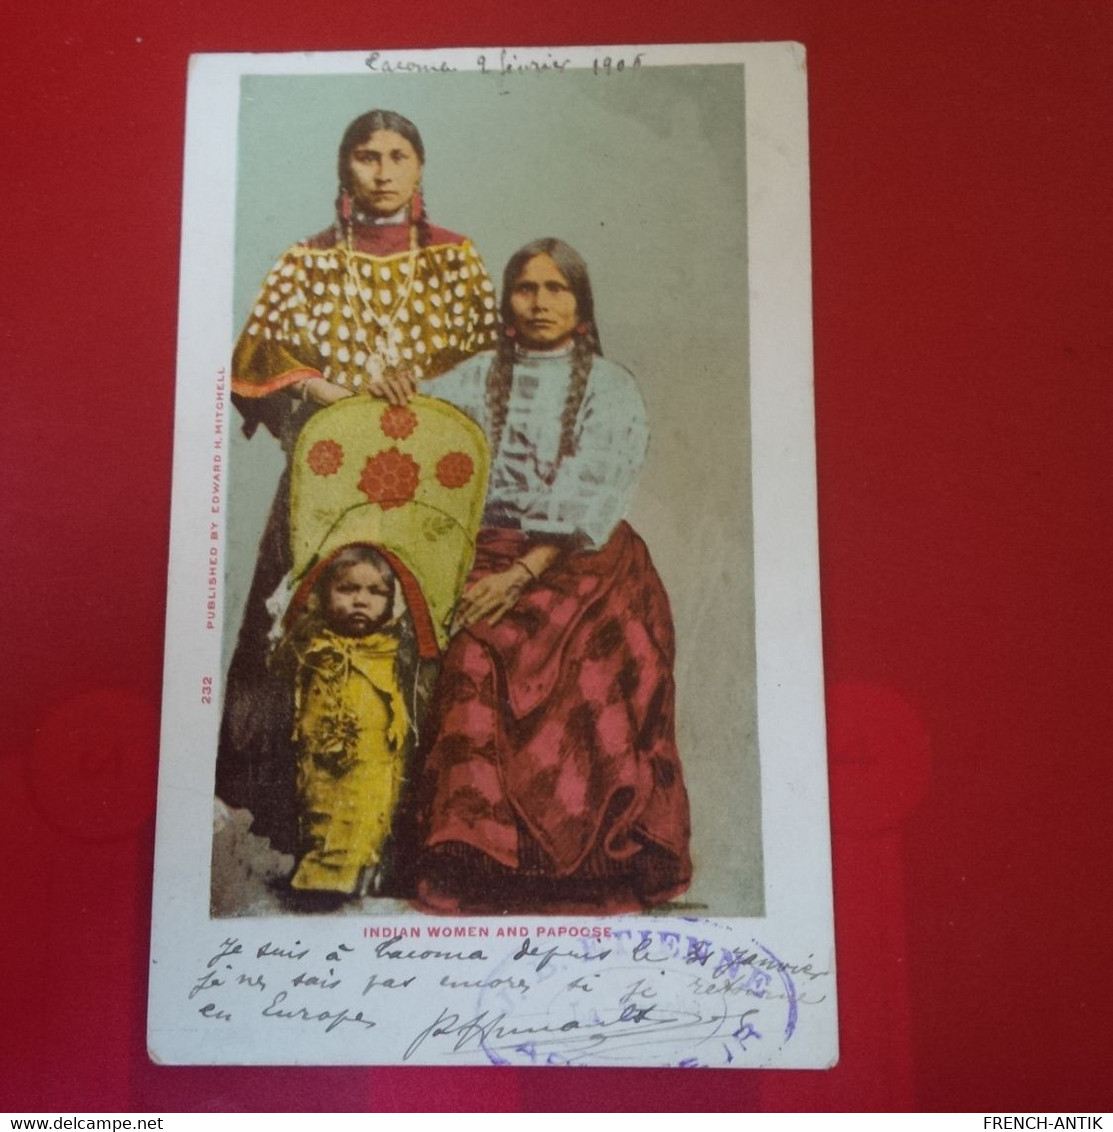 INDIAN WOMEN AND PAPOOSE - Native Americans